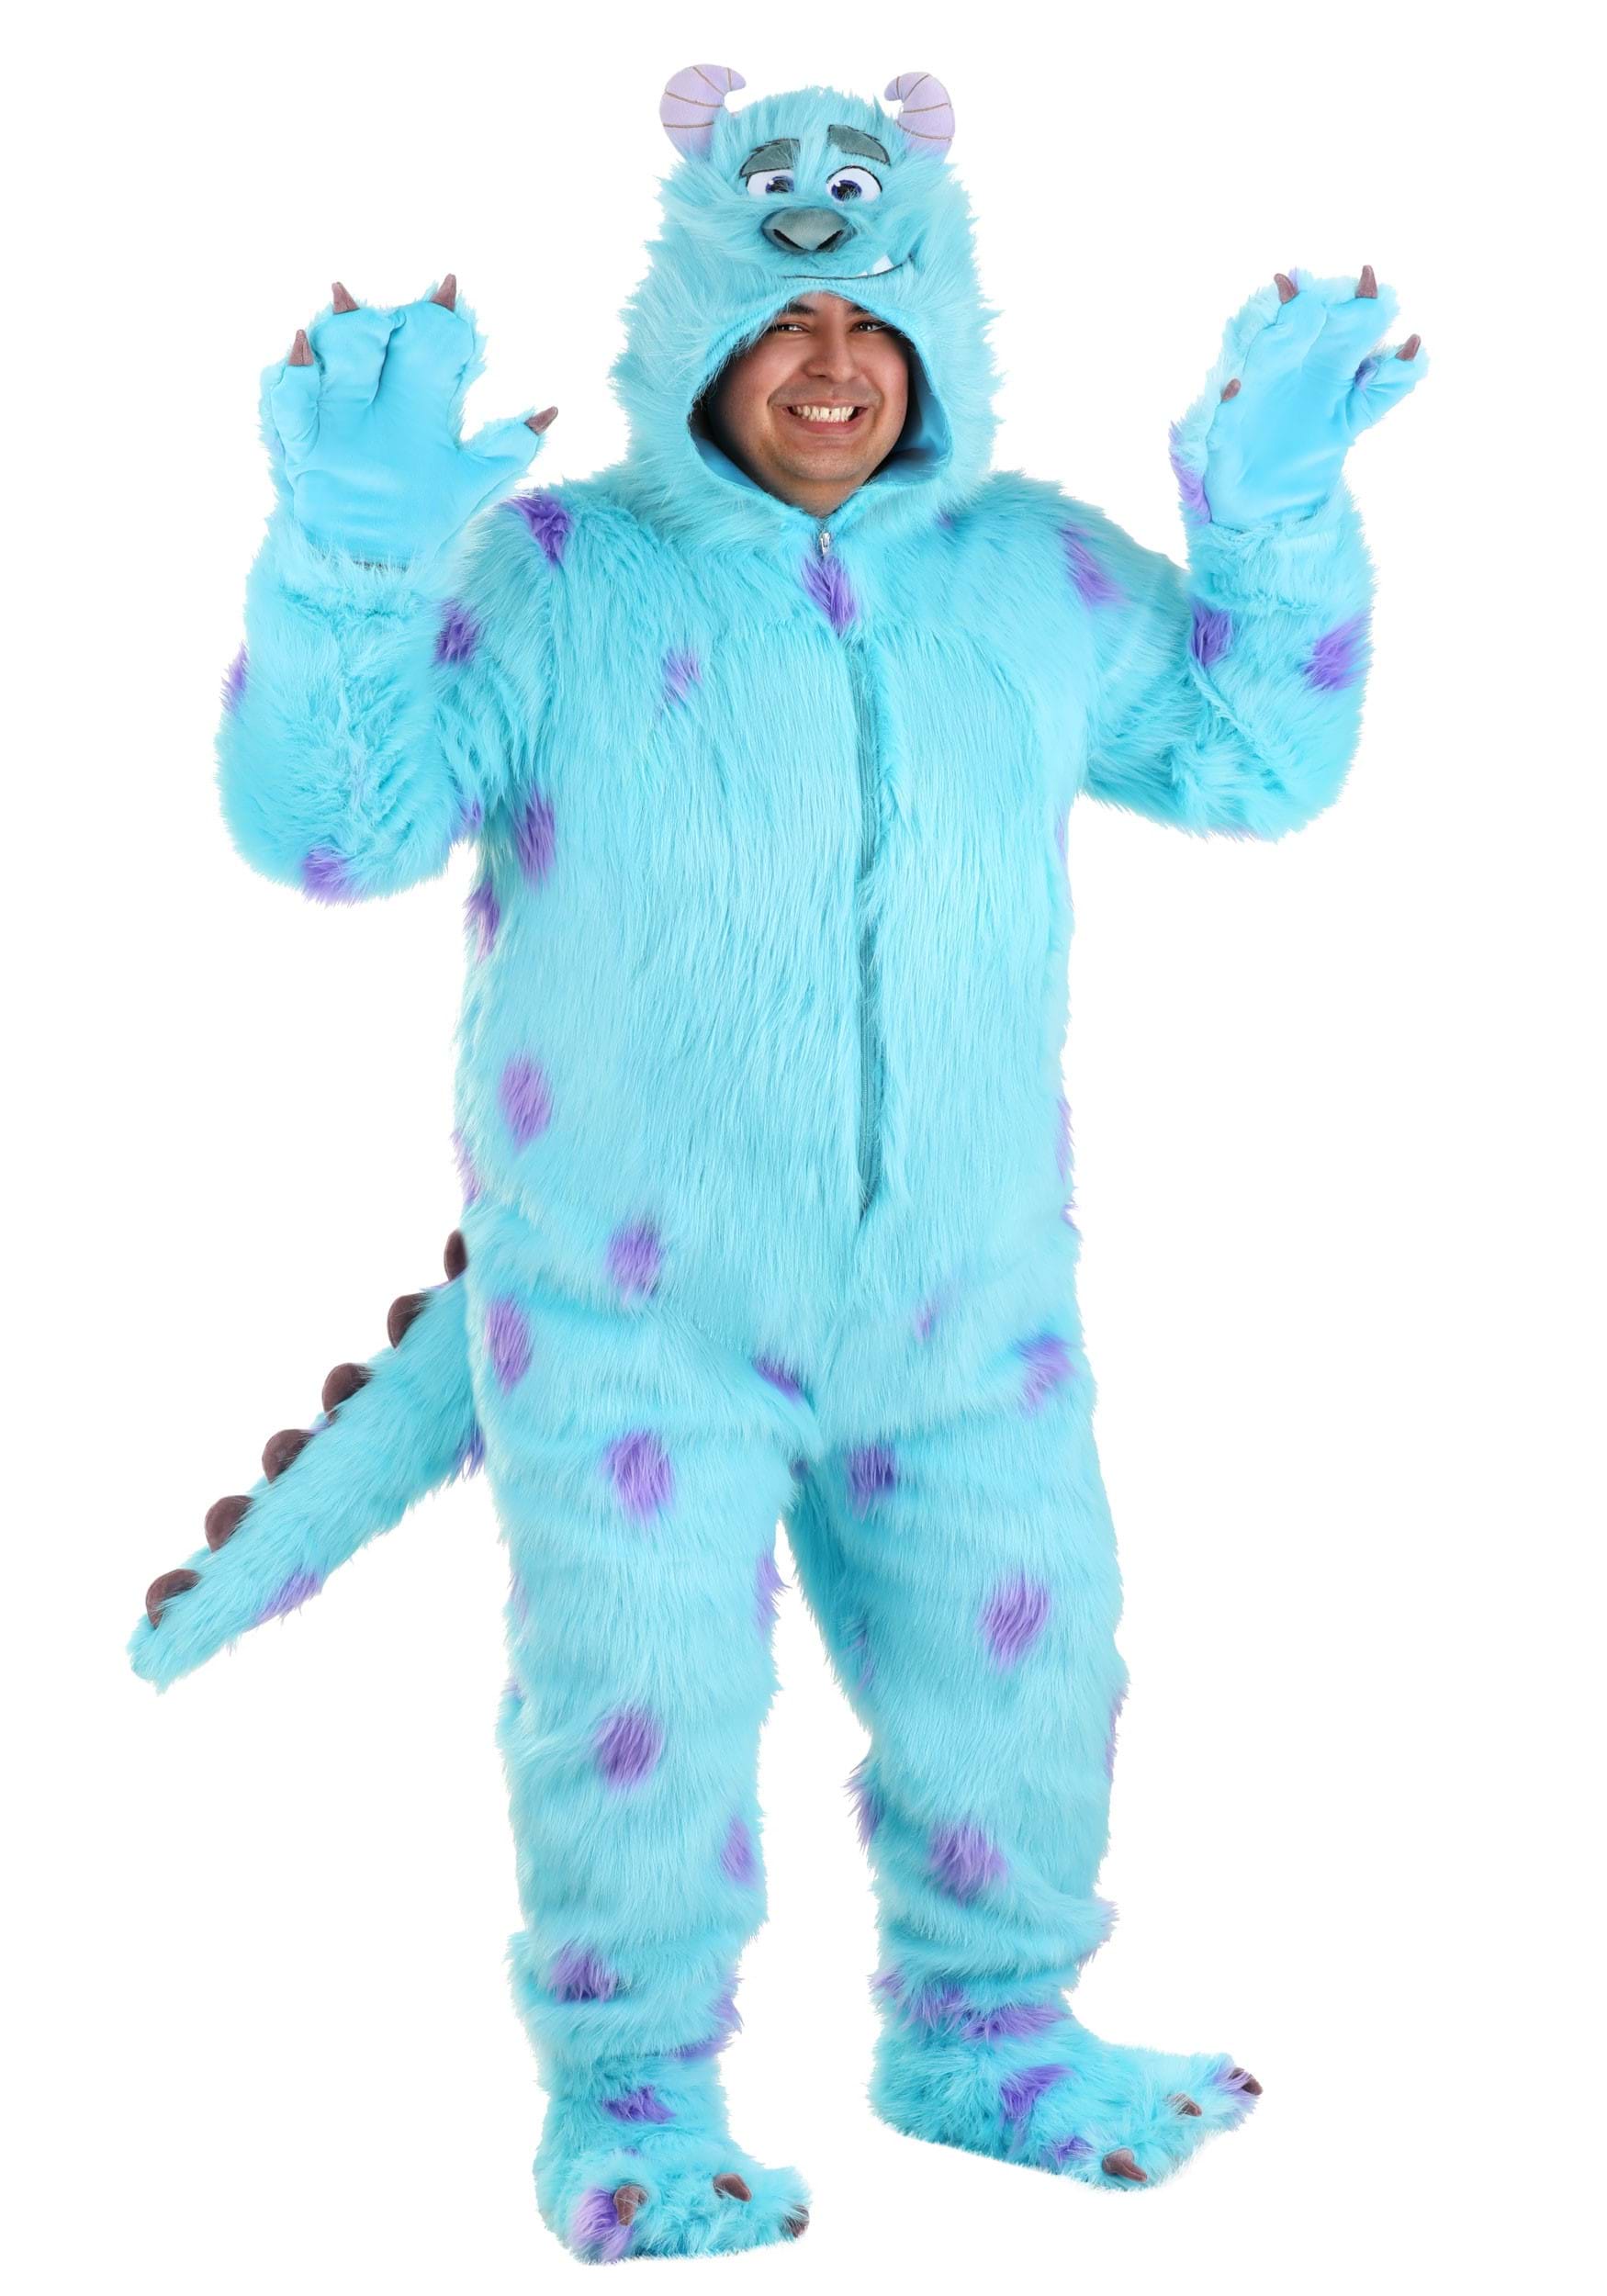 Photos - Fancy Dress FUN Costumes Plus Size Hooded Monsters Inc Sulley Costume for Adults | Dis